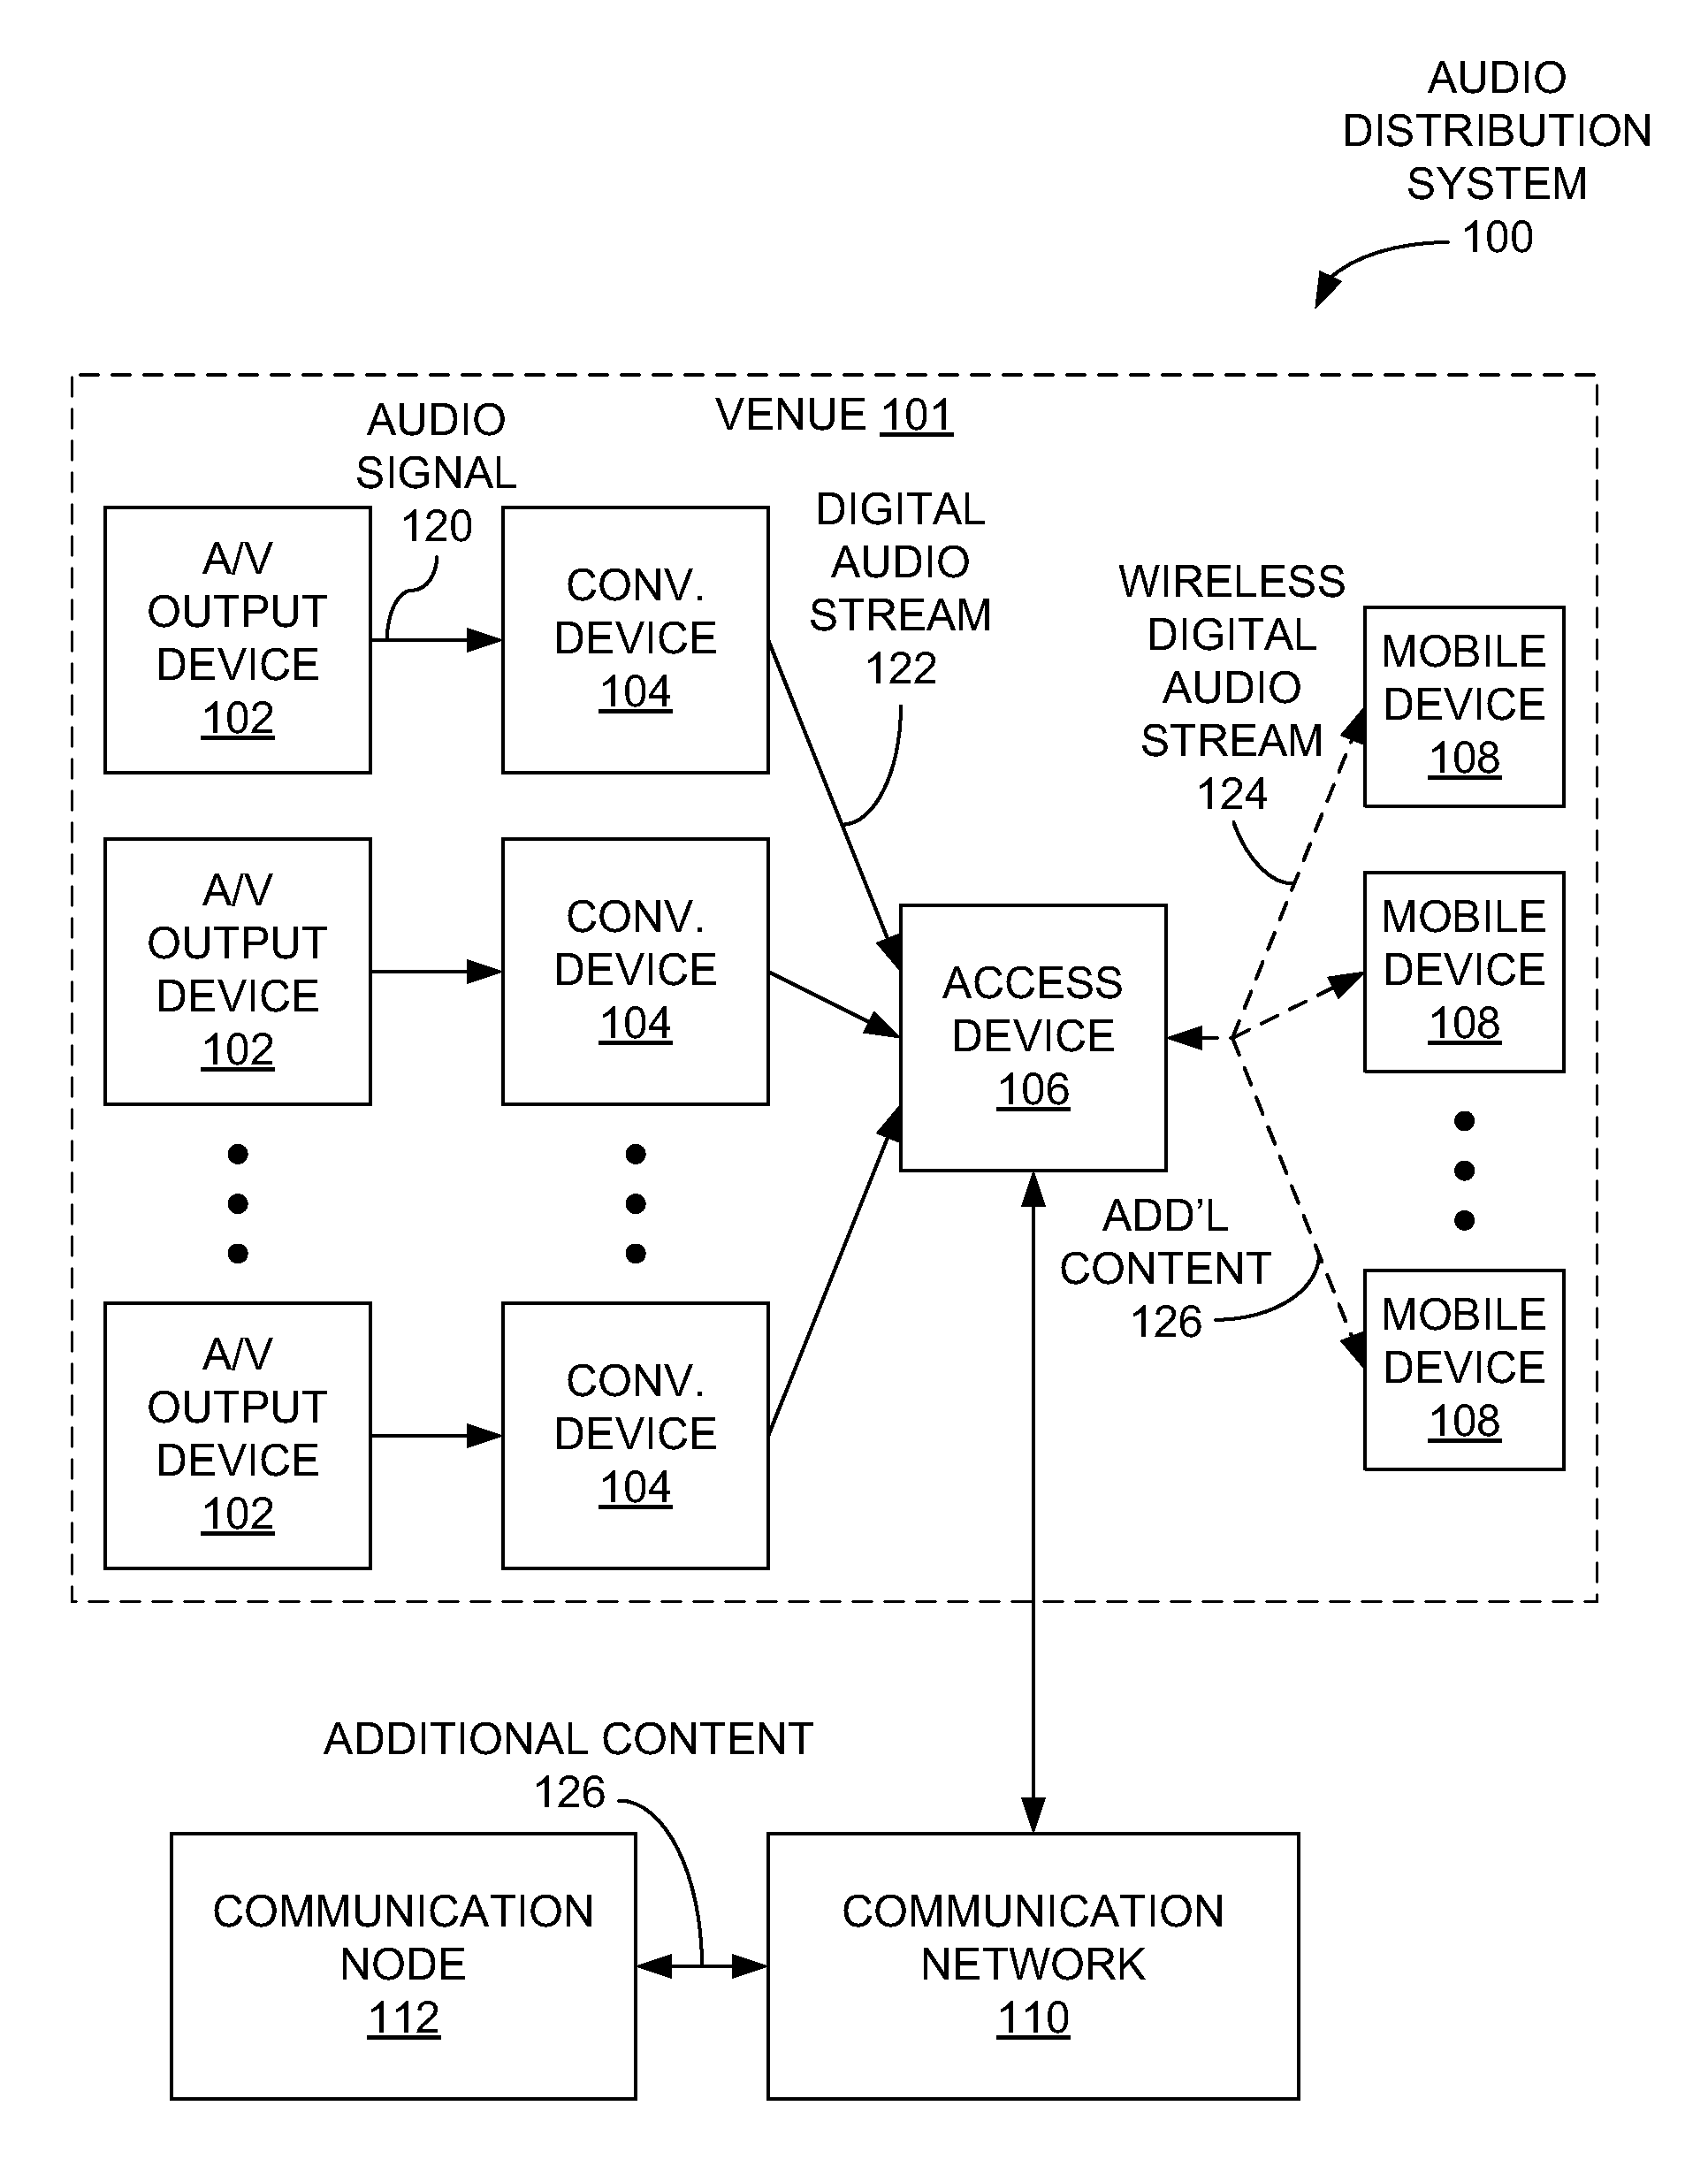 Venue-oriented social functionality via a mobile communication device